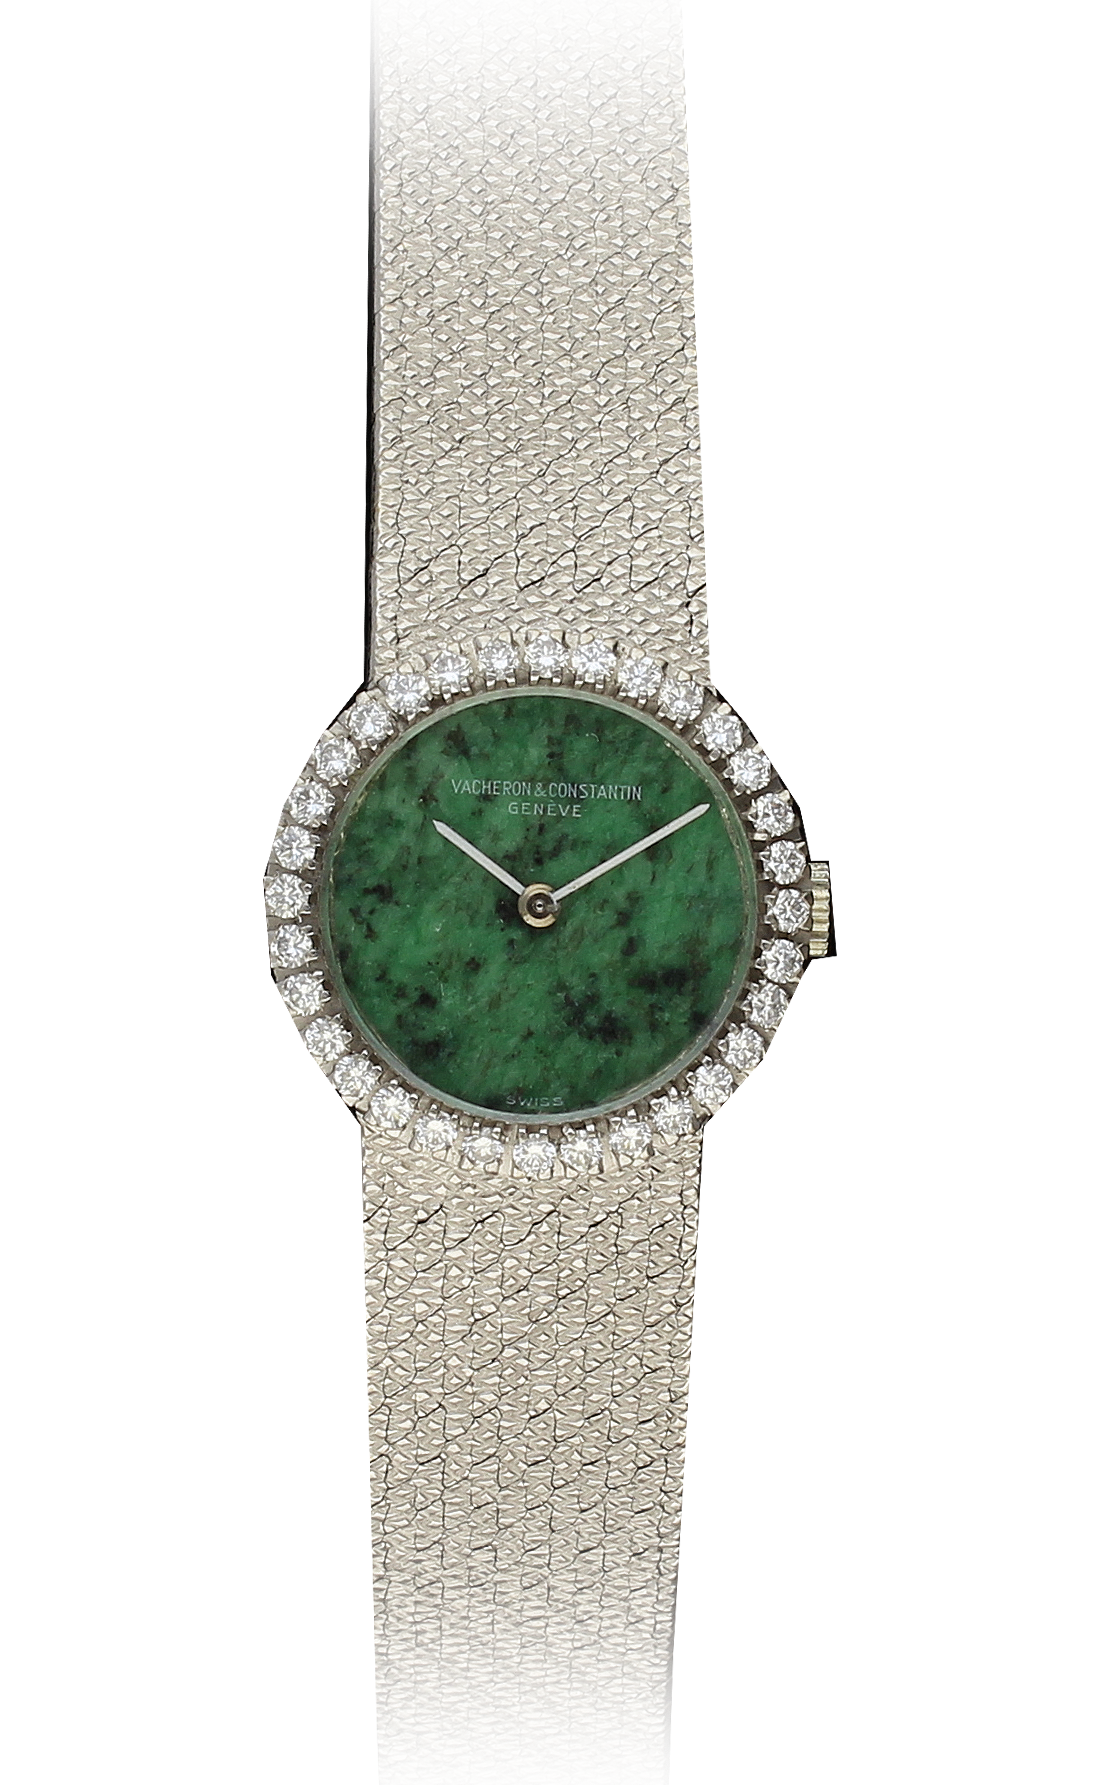 18ct white gold and diamond set with jade dial bracelet watch. Made 1970's